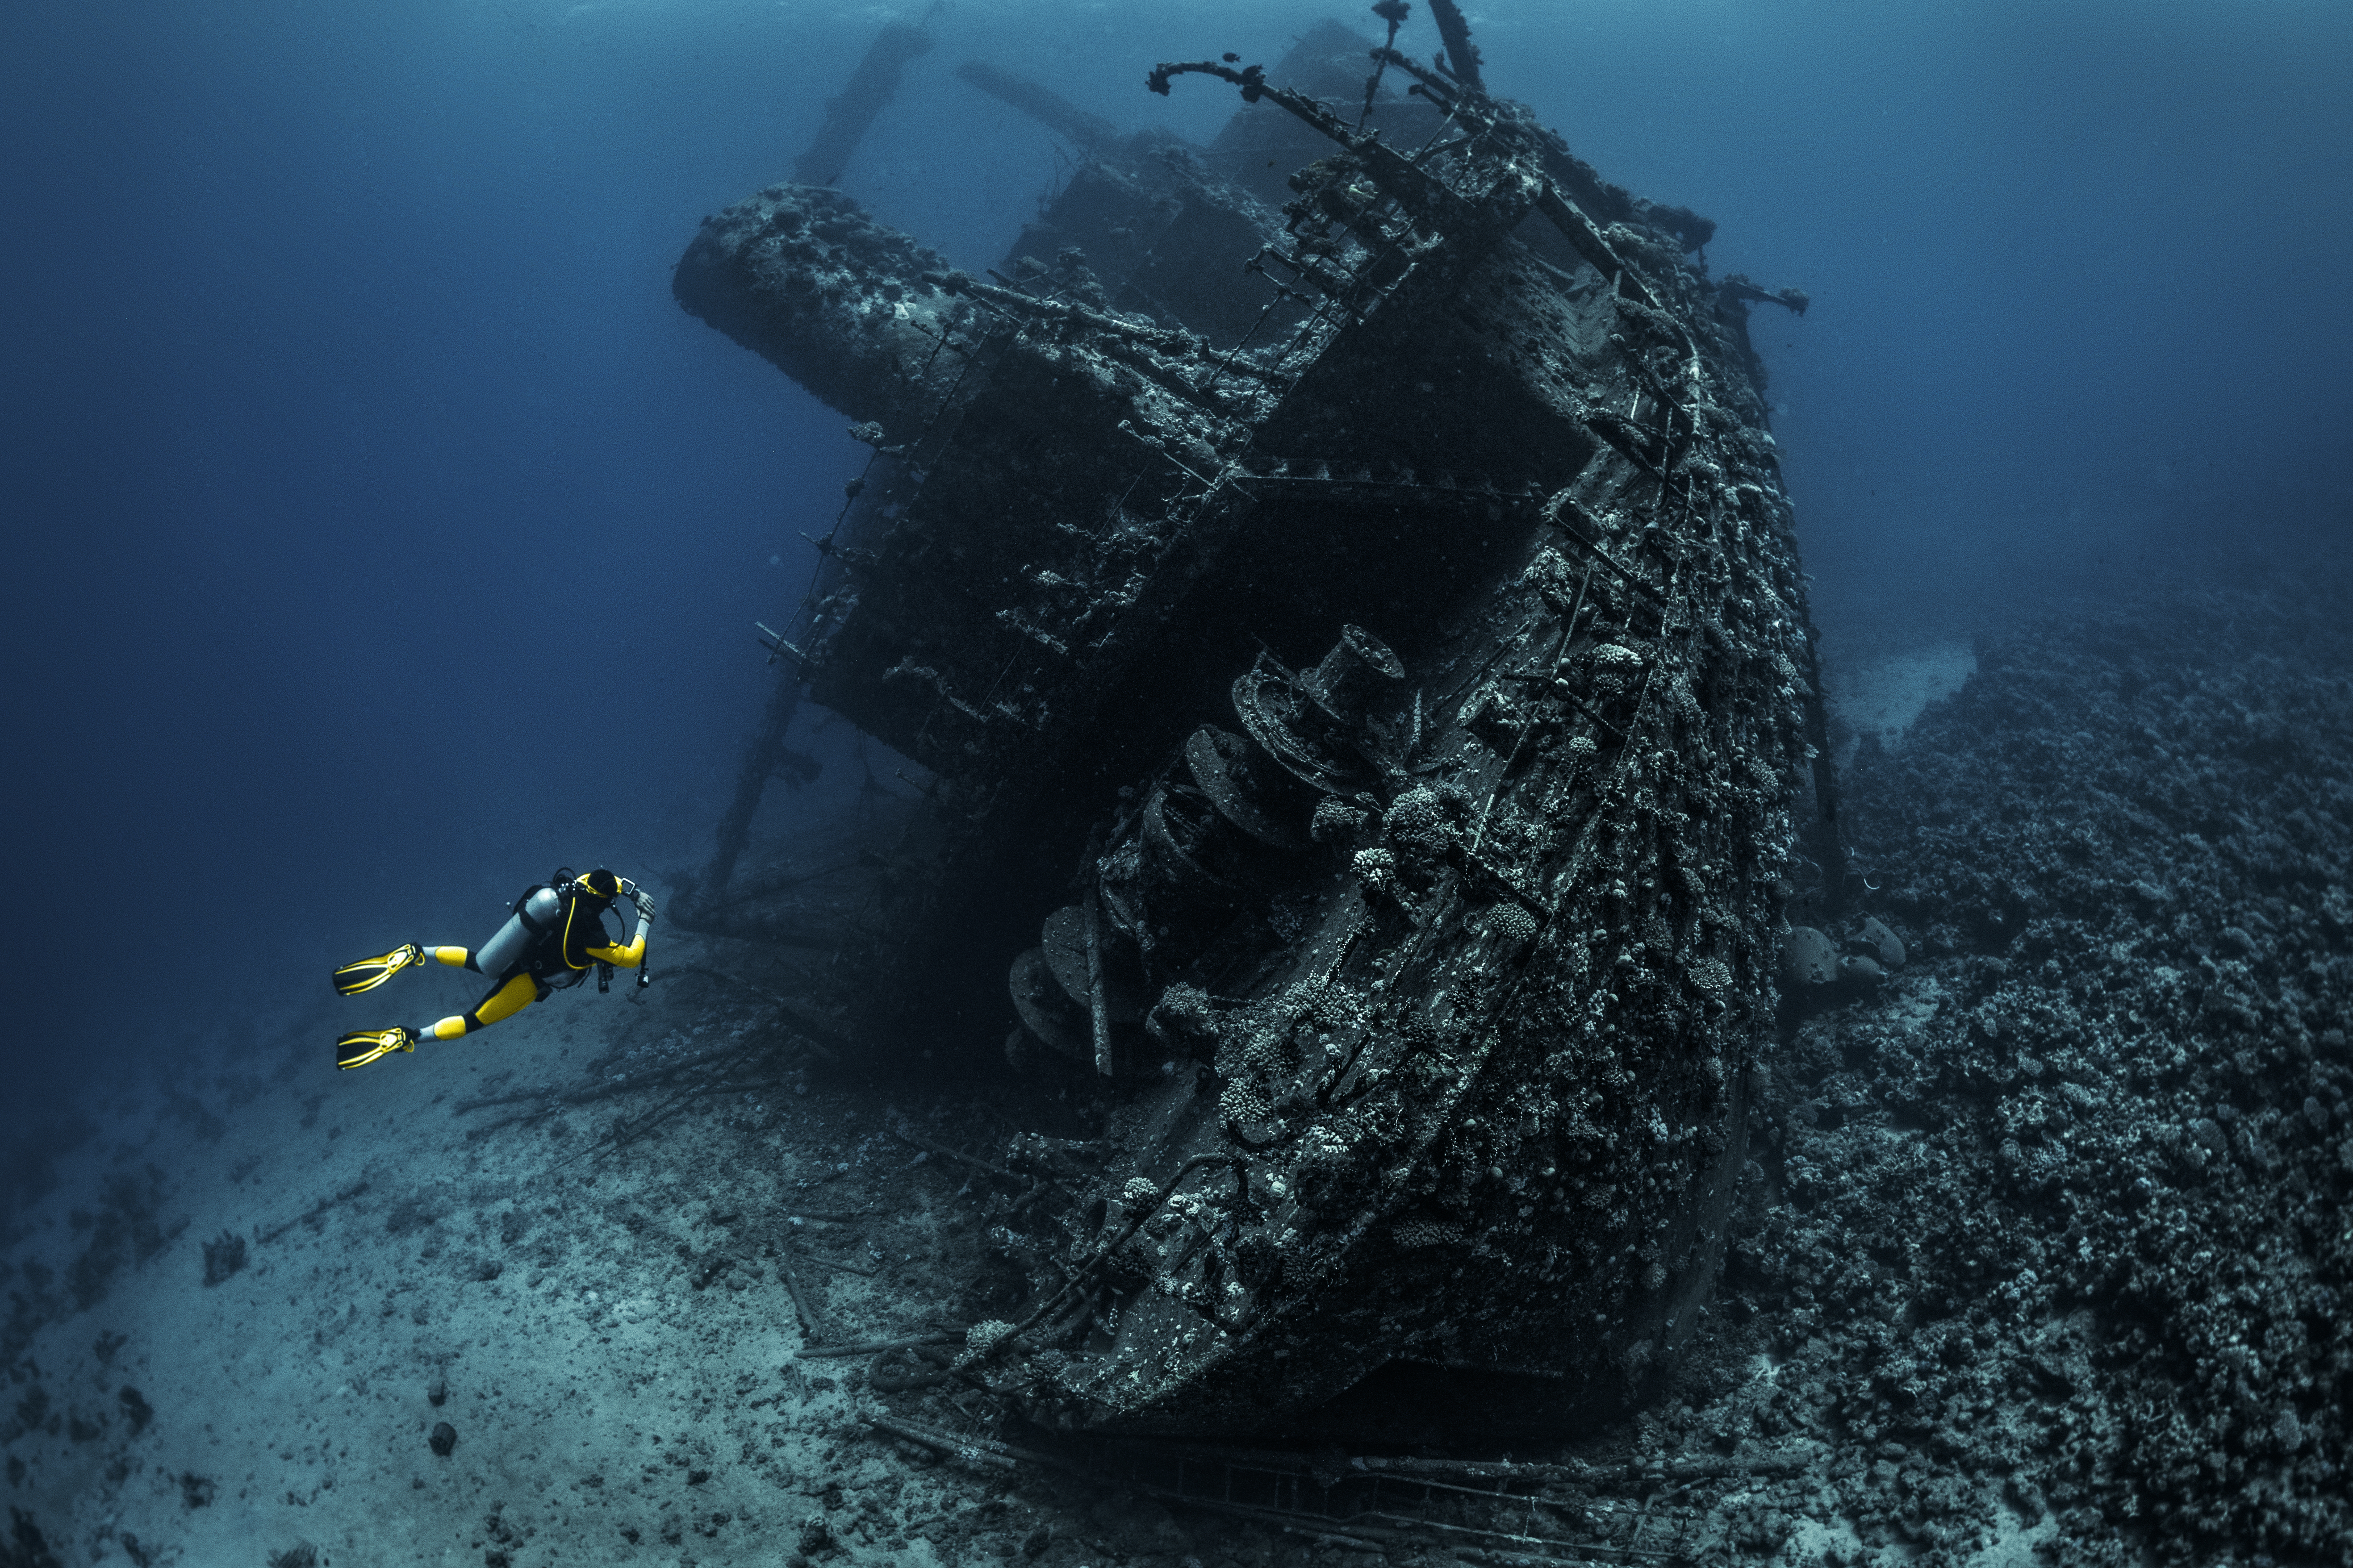 Scuba diver observing a large shipwreck completely rusted and overgrown lying underwater in the Red Sea - stock photo